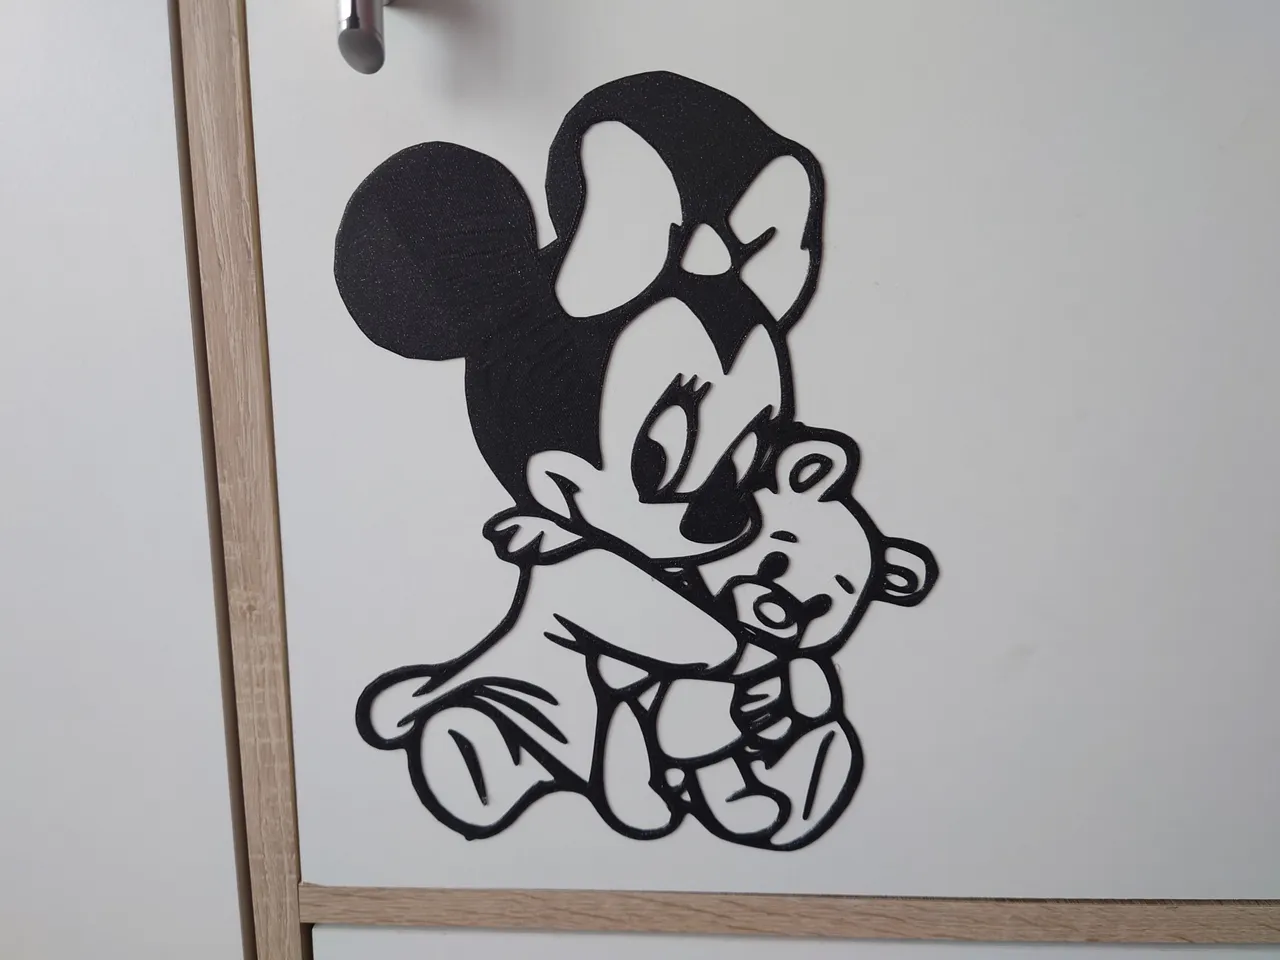 How to draw Mickey and minnie mouse | Mickey mouse drawing - YouTube